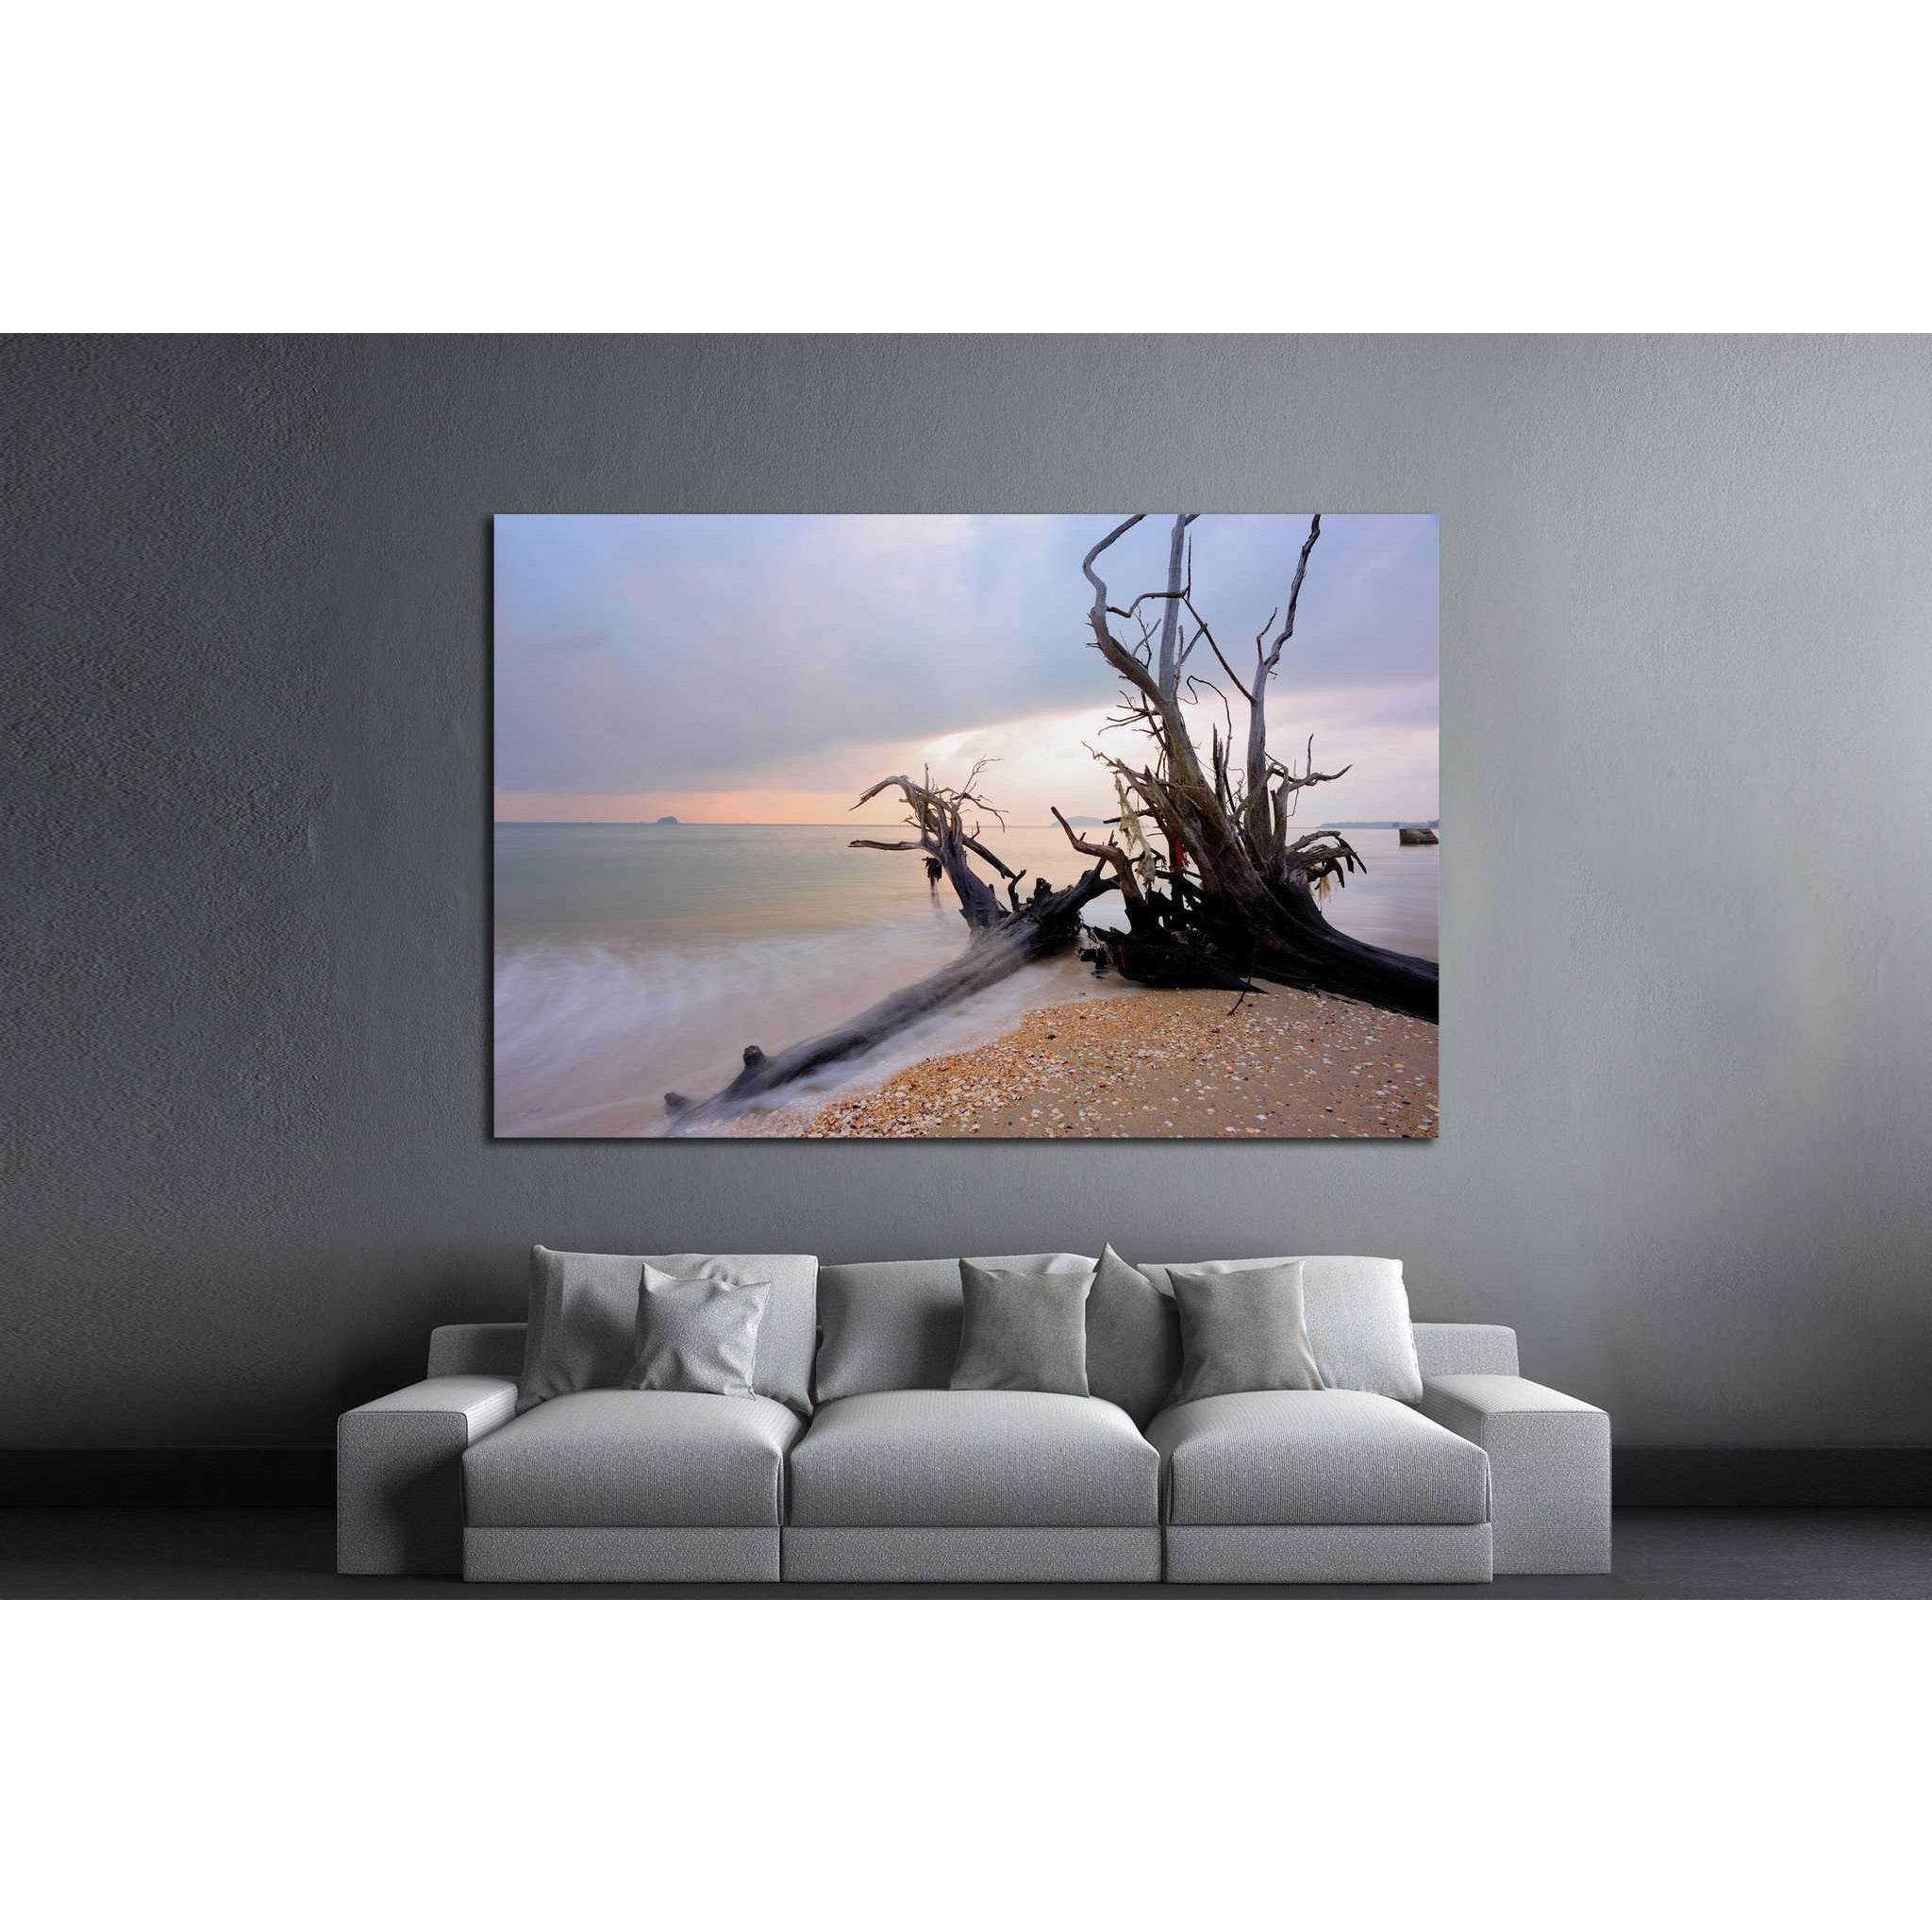 Root on the beach №1971 Ready to Hang Canvas Print